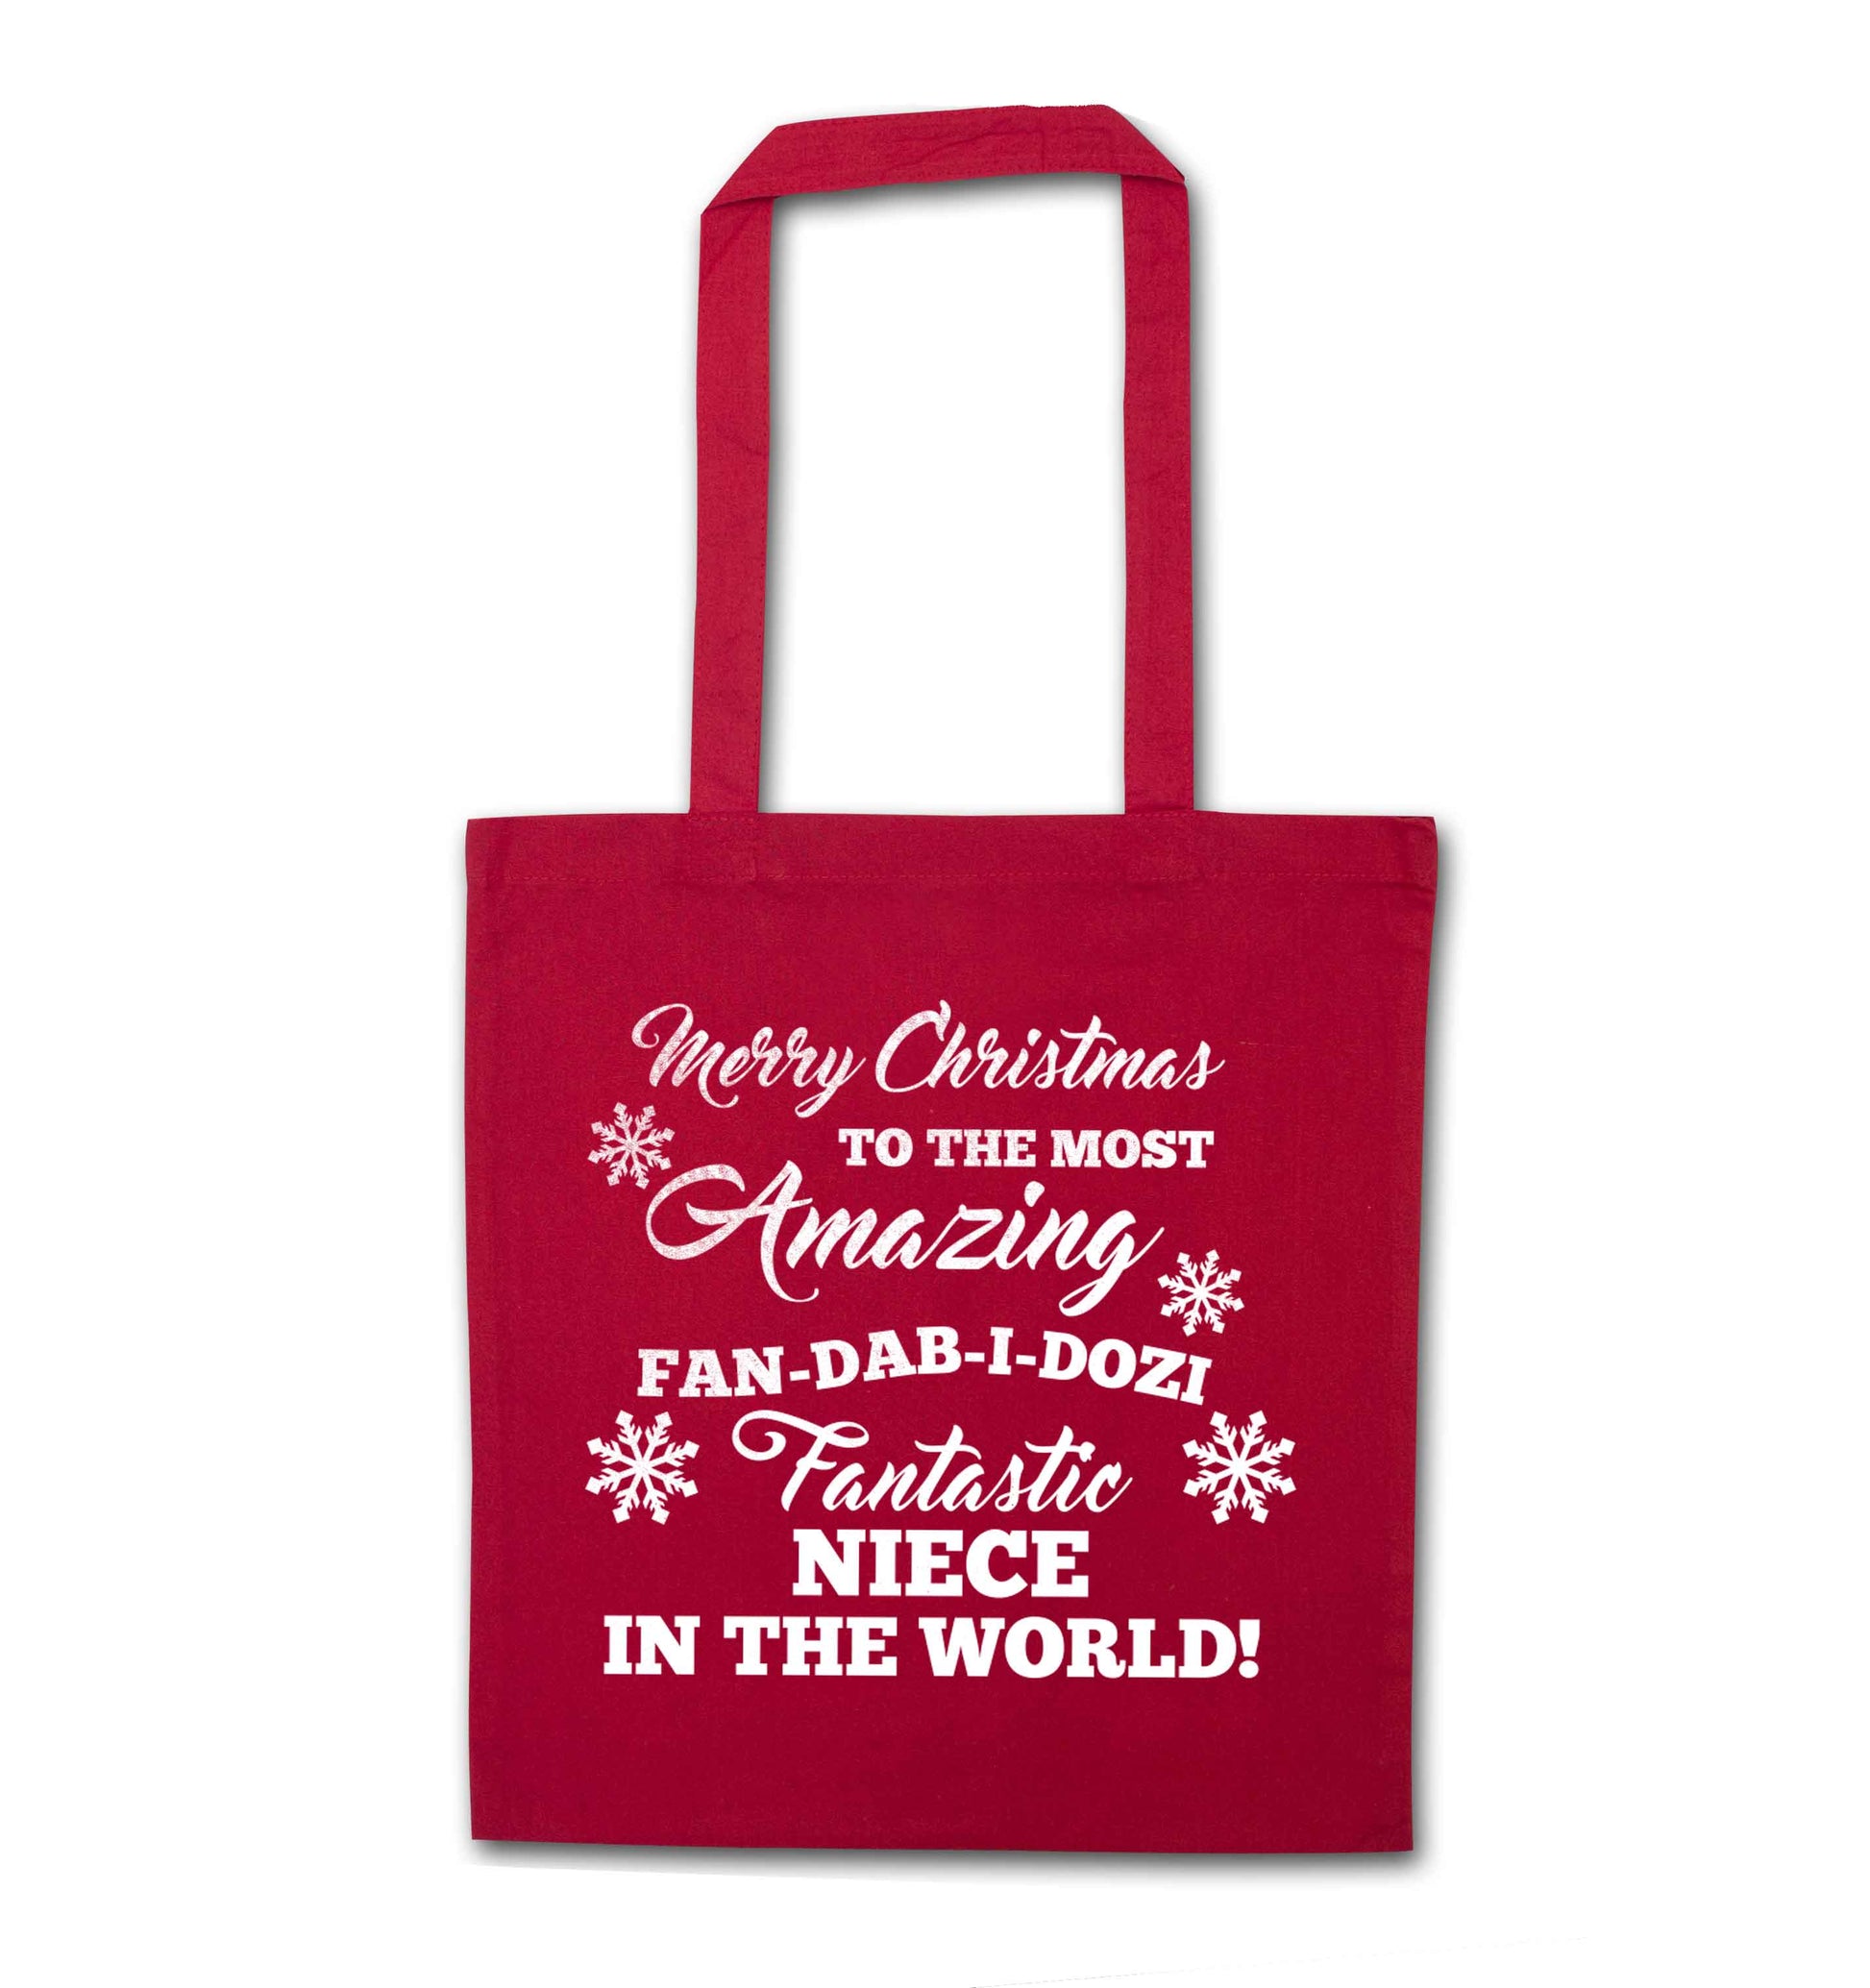 Merry Christmas to the most amazing fan-dab-i-dozi fantasic Niece in the world red tote bag